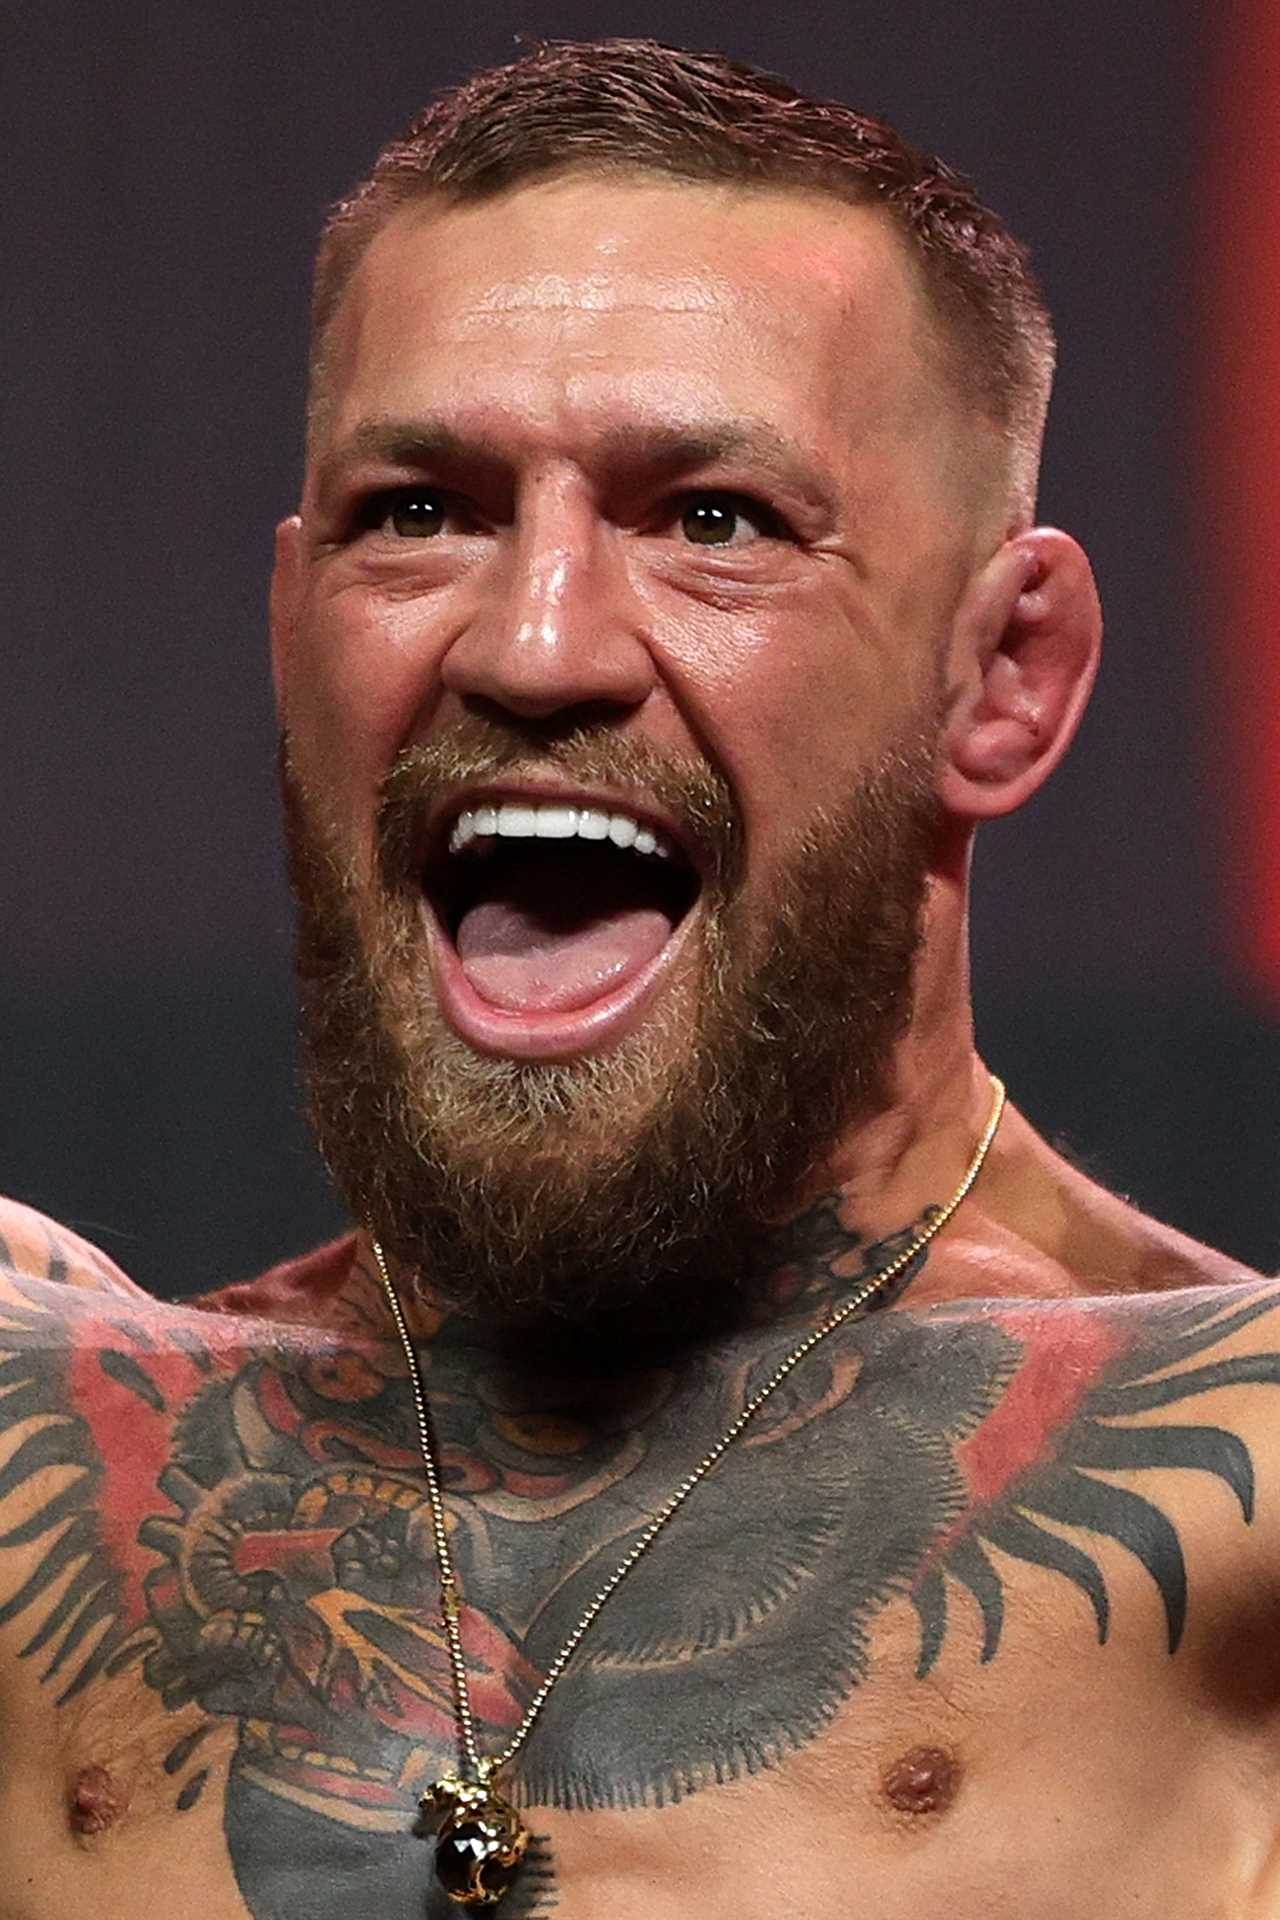 Conor McGregor said he should RETIRE if he loses the UFC return fight against Michael Chandler